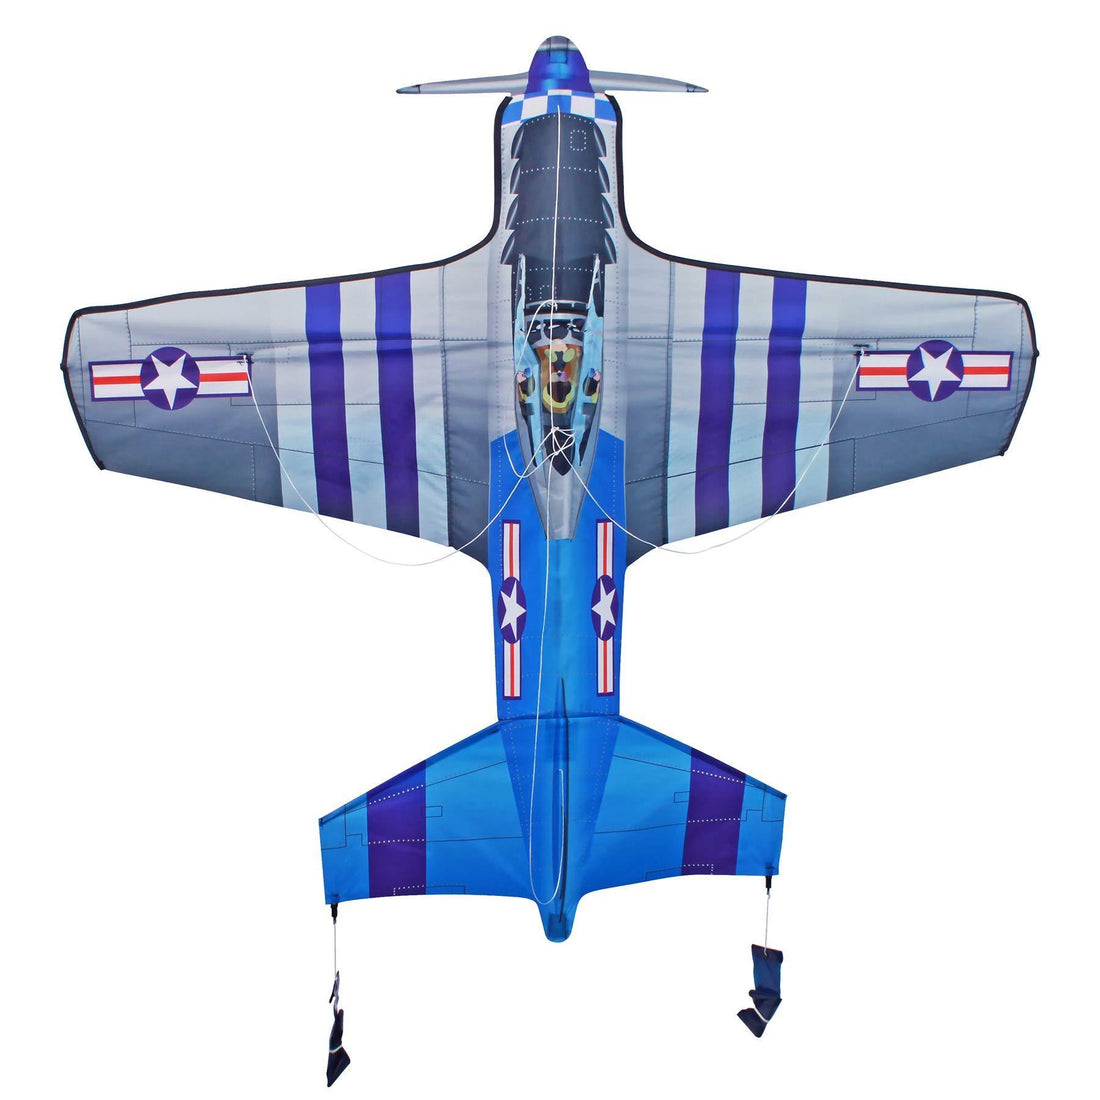 3D P-51 Mustang Fighter Plane - Kitty Hawk Kites Online Store